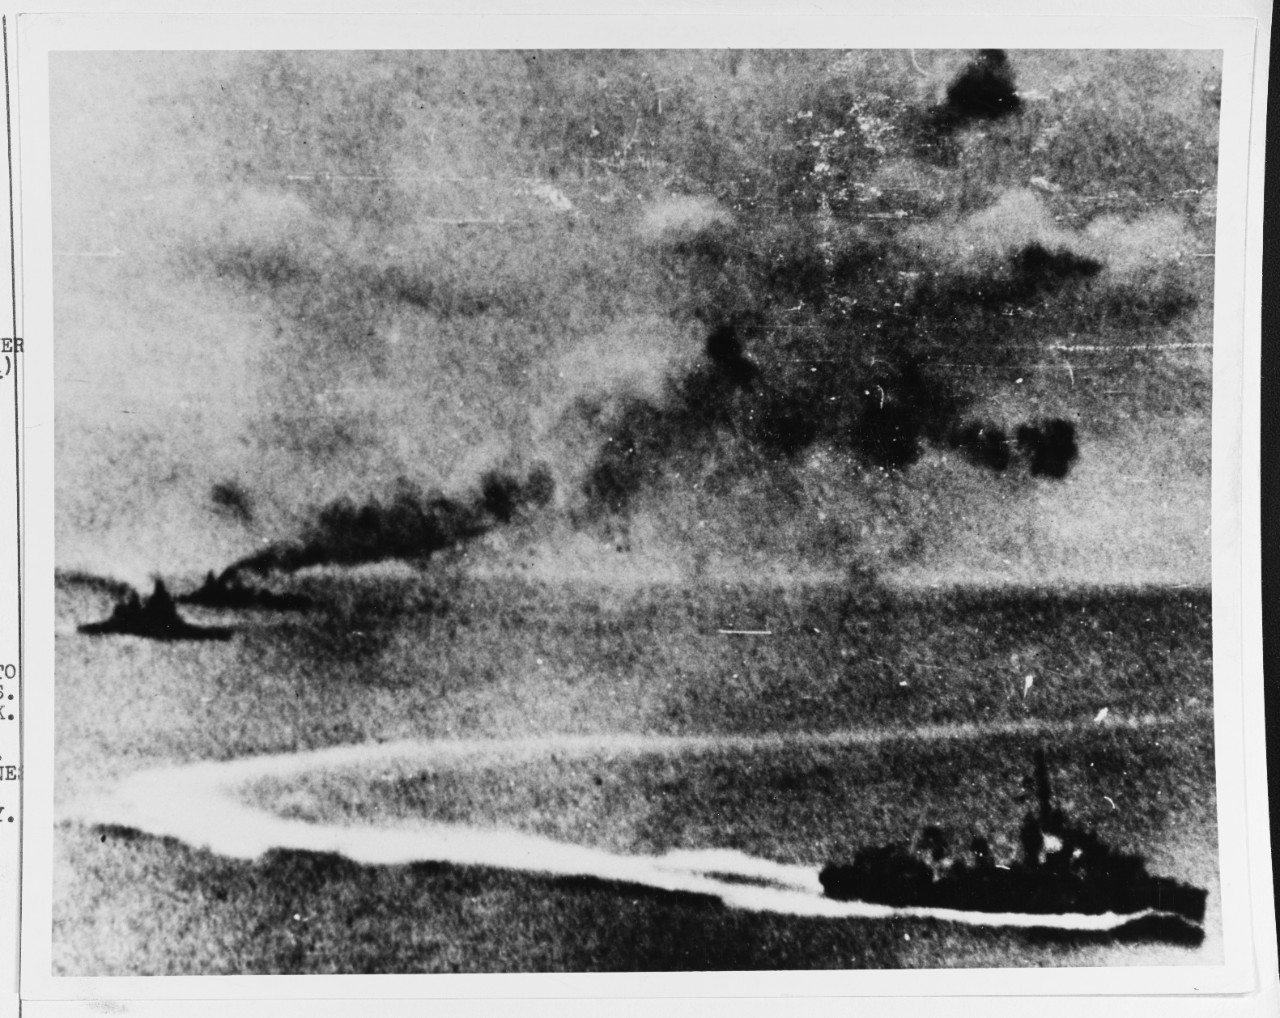 Photo #: 80-G-413520  Loss of HMS Prince of Wales and HMS Repulse, 10 December 1941